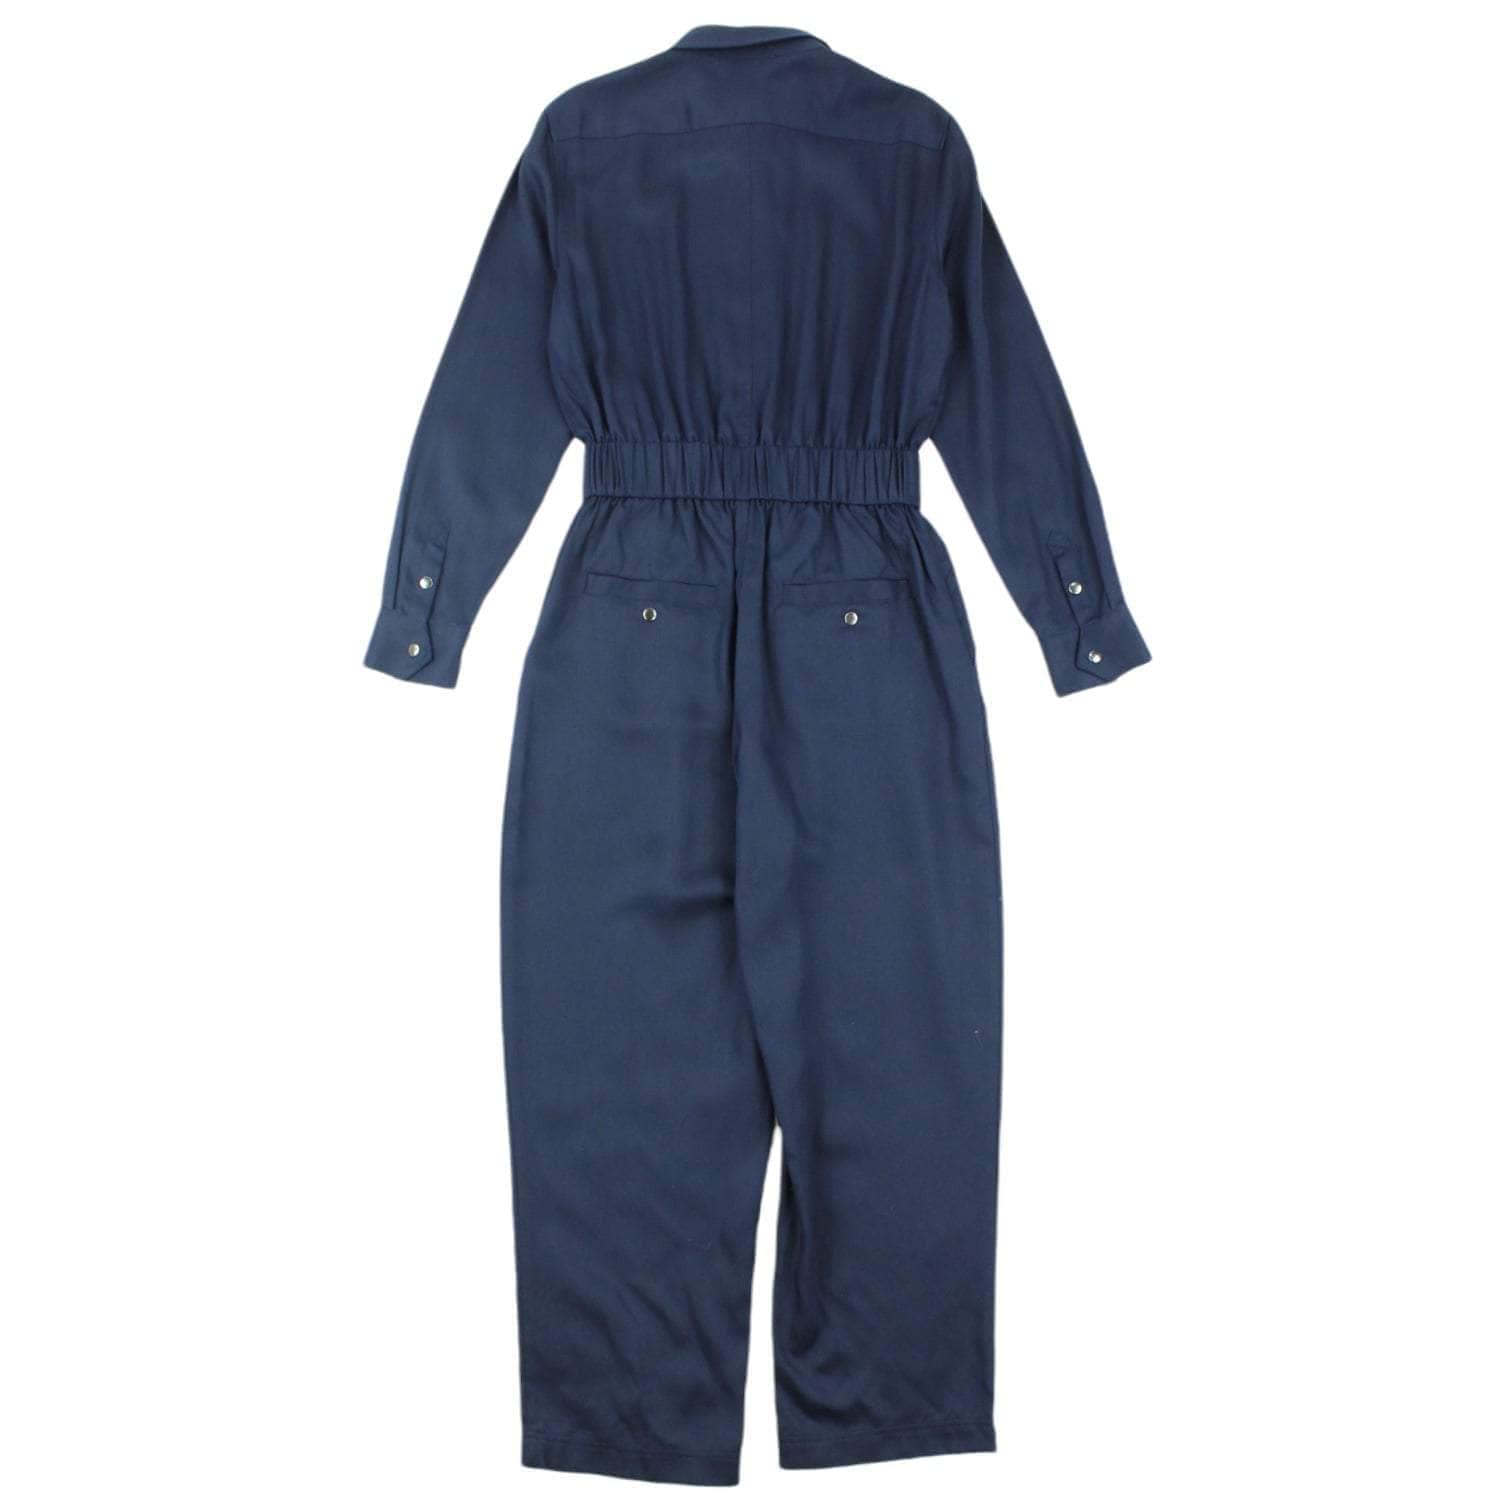 NRBY Navy Blue Jumpsuit